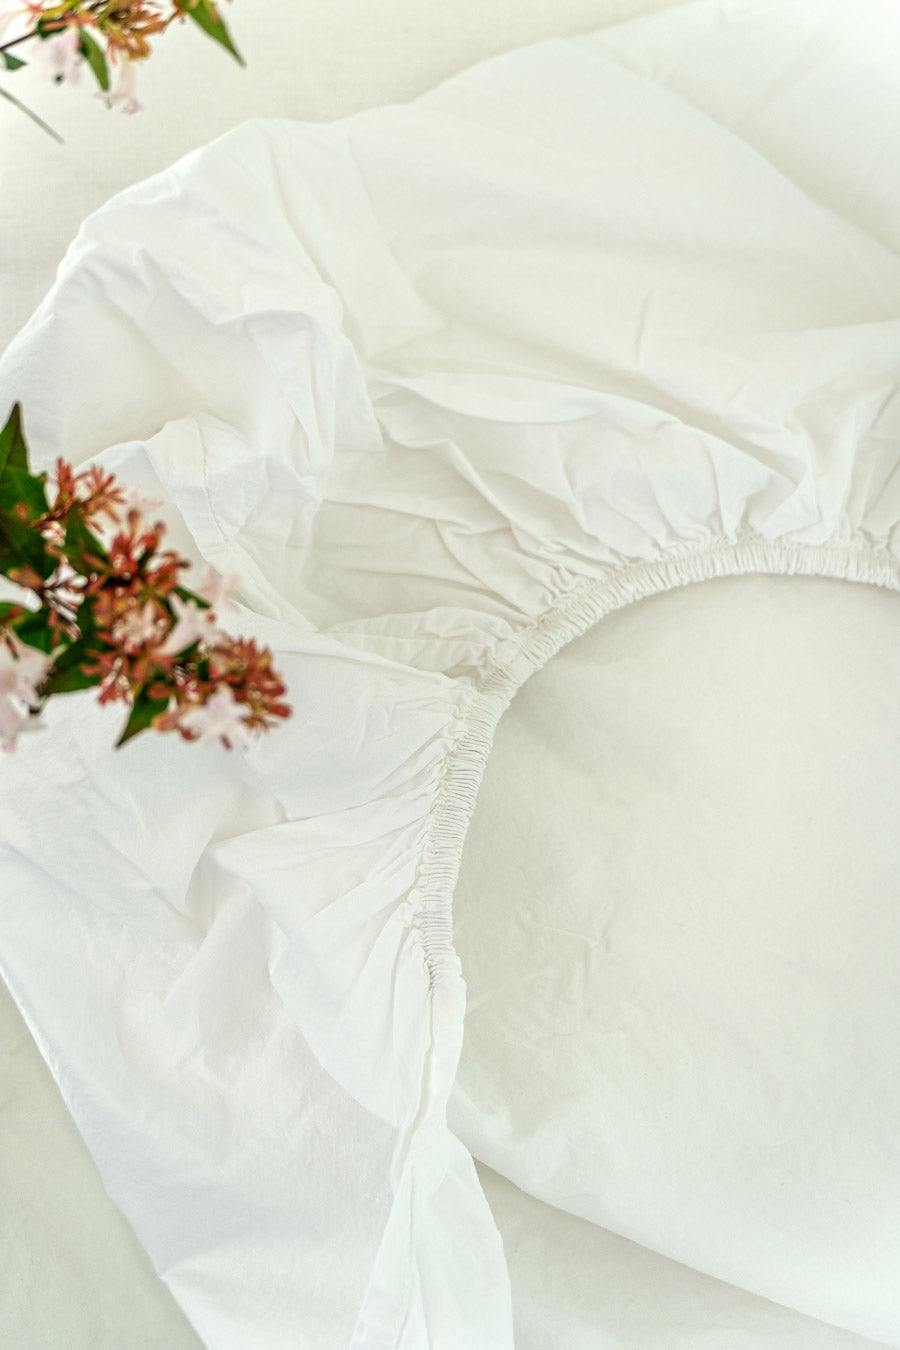 Detail of the elastic on the white Organic Cotton Percale fitted sheet.